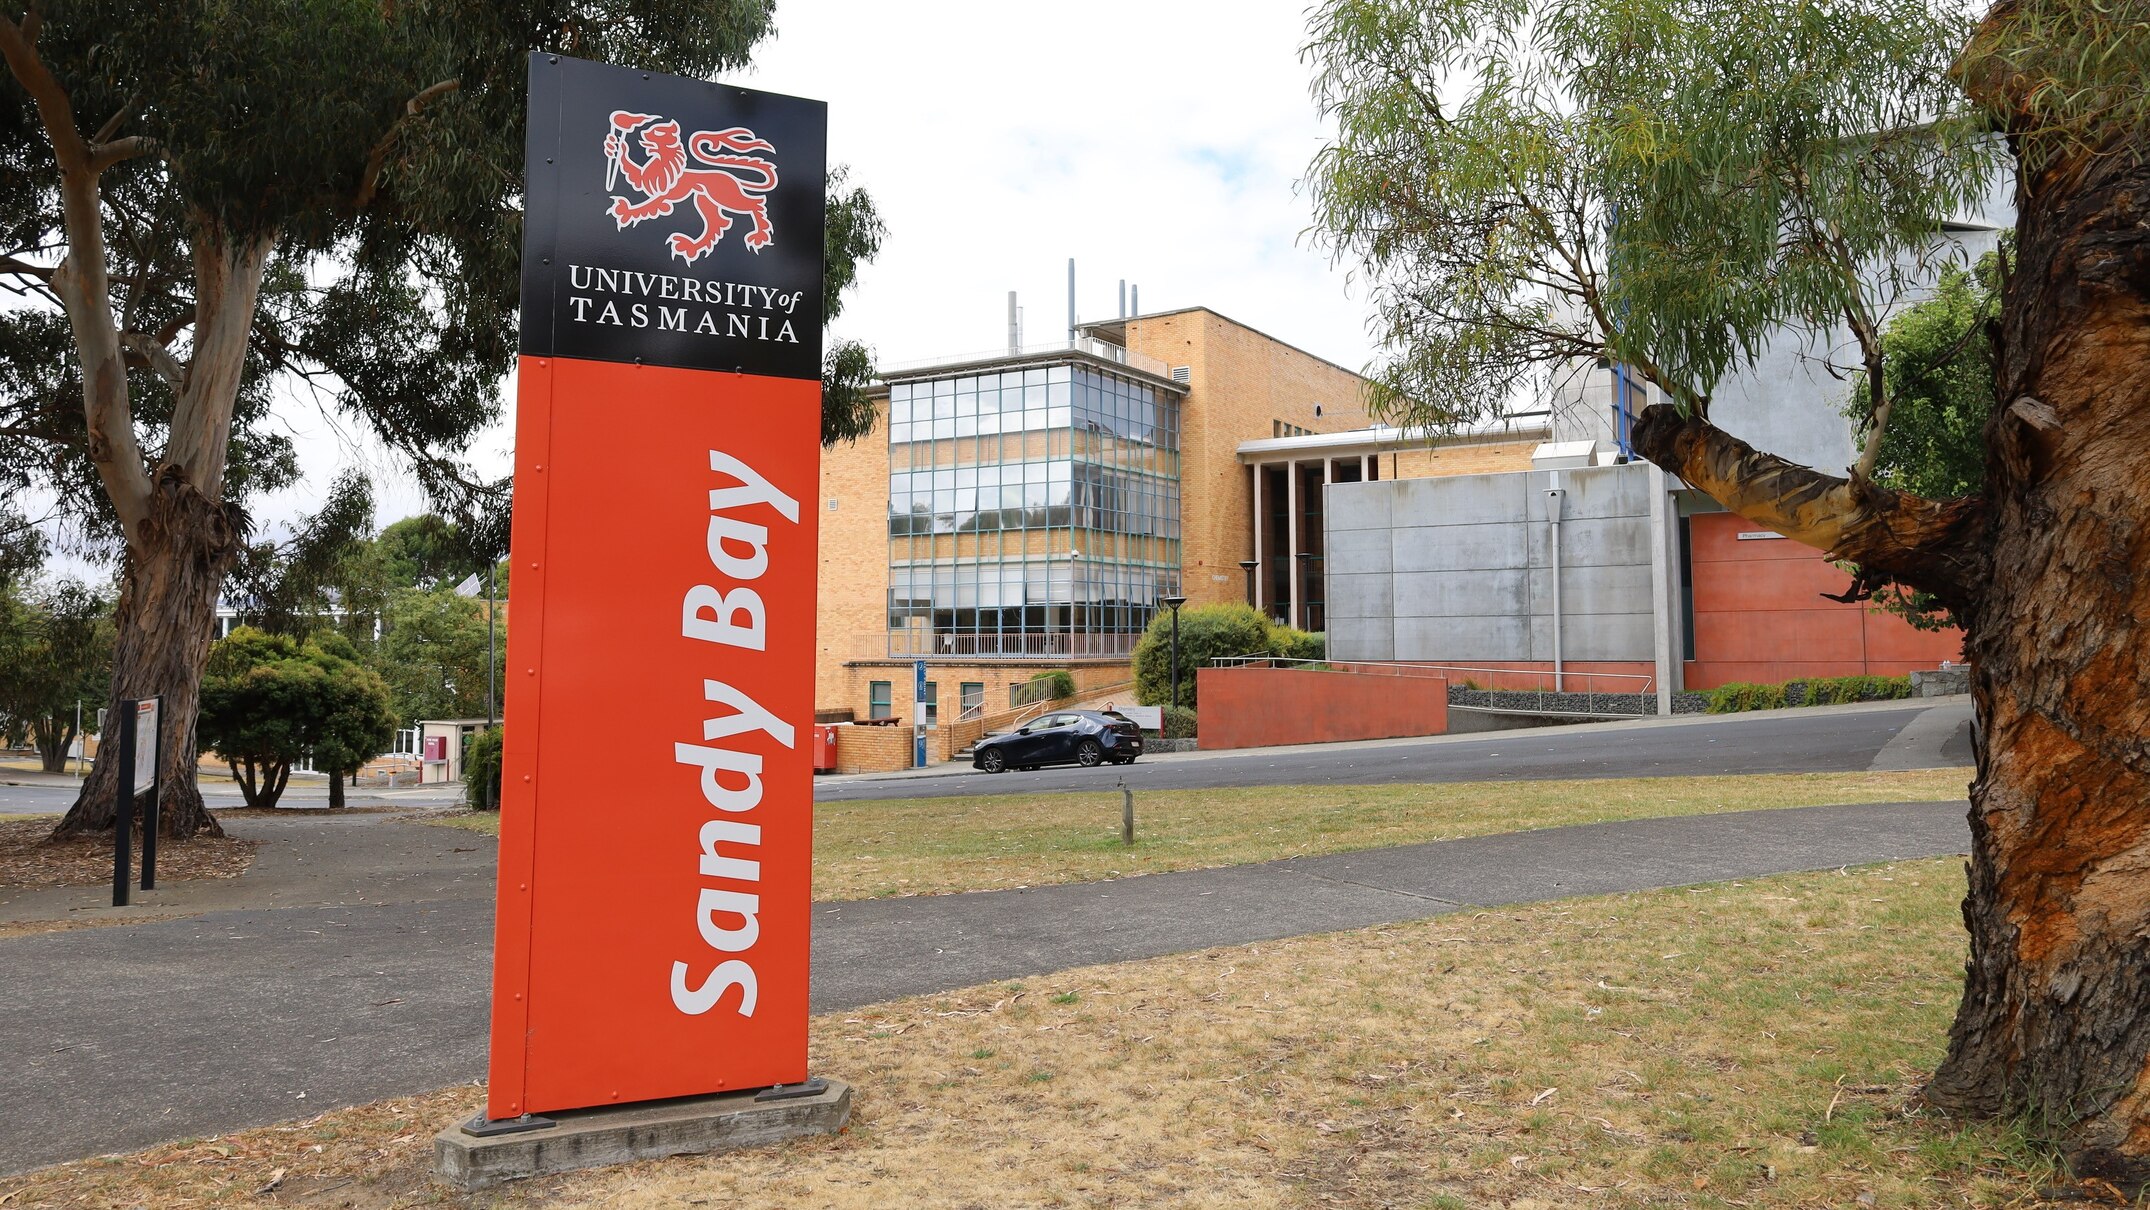 tasmanian liberals say they will try to keep university of tasmania at sandy bay campus if they win majority government